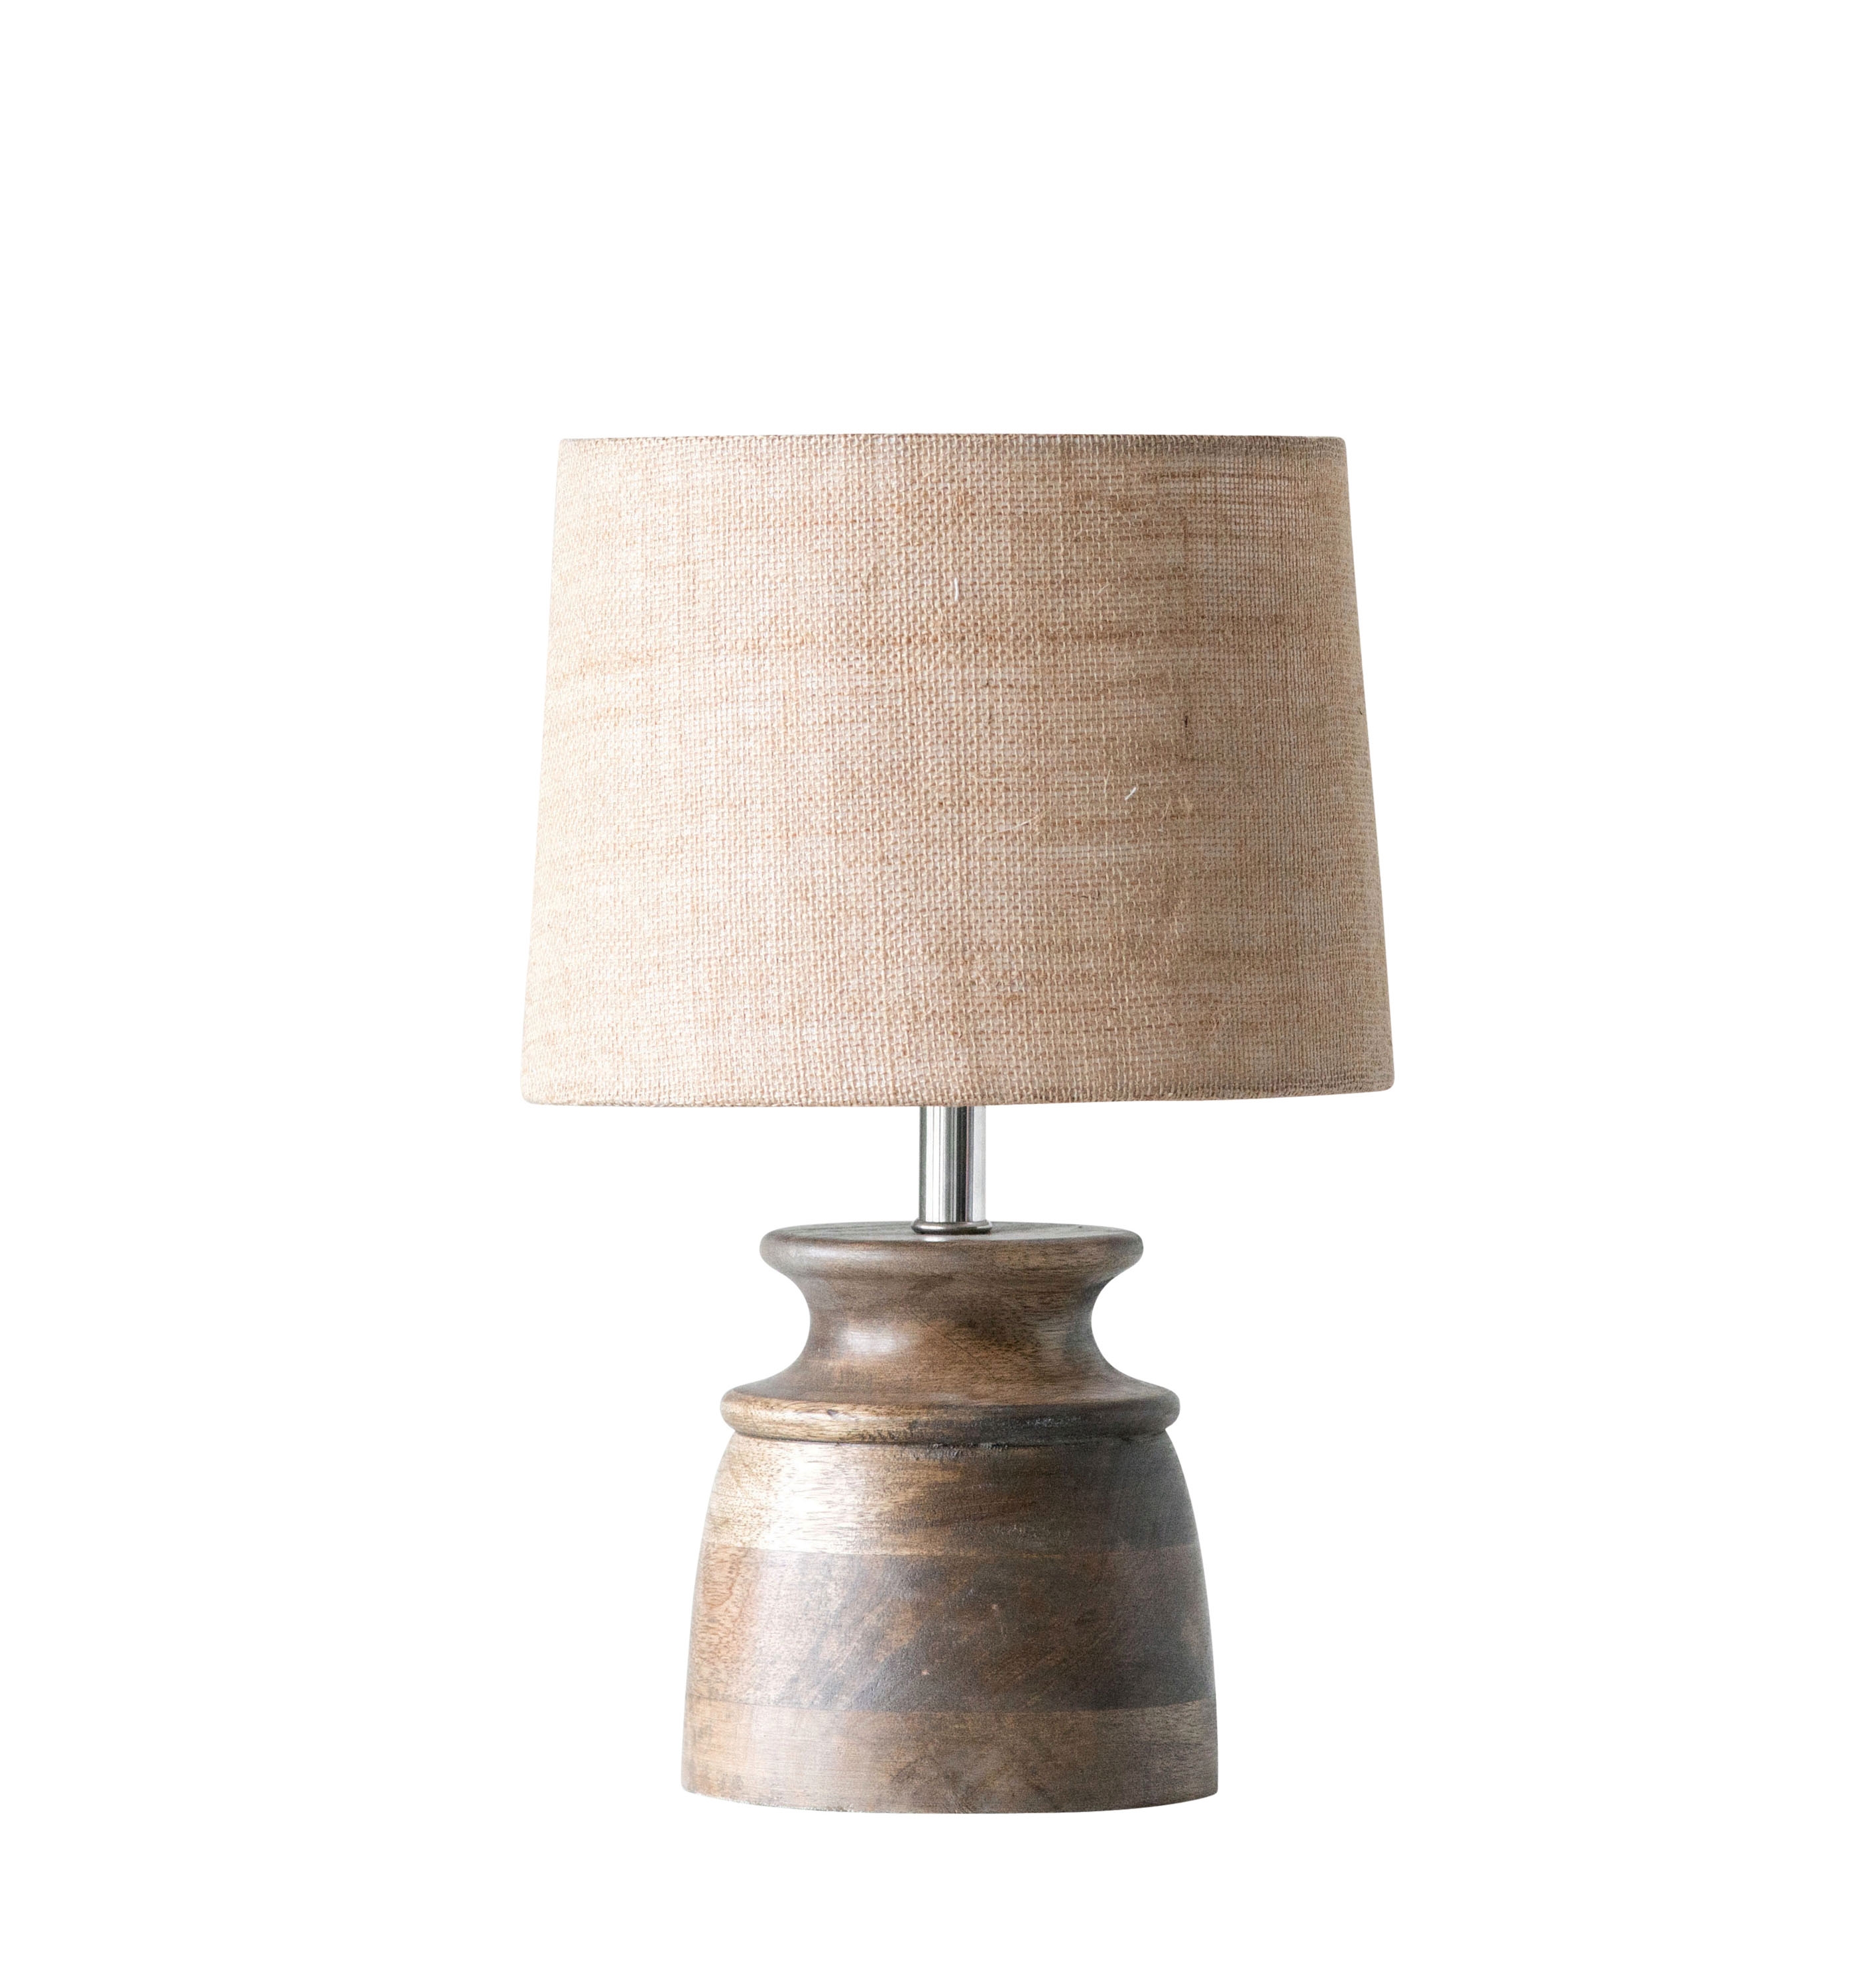 Wood Table Lamp with Jute Shade, Small - Image 0